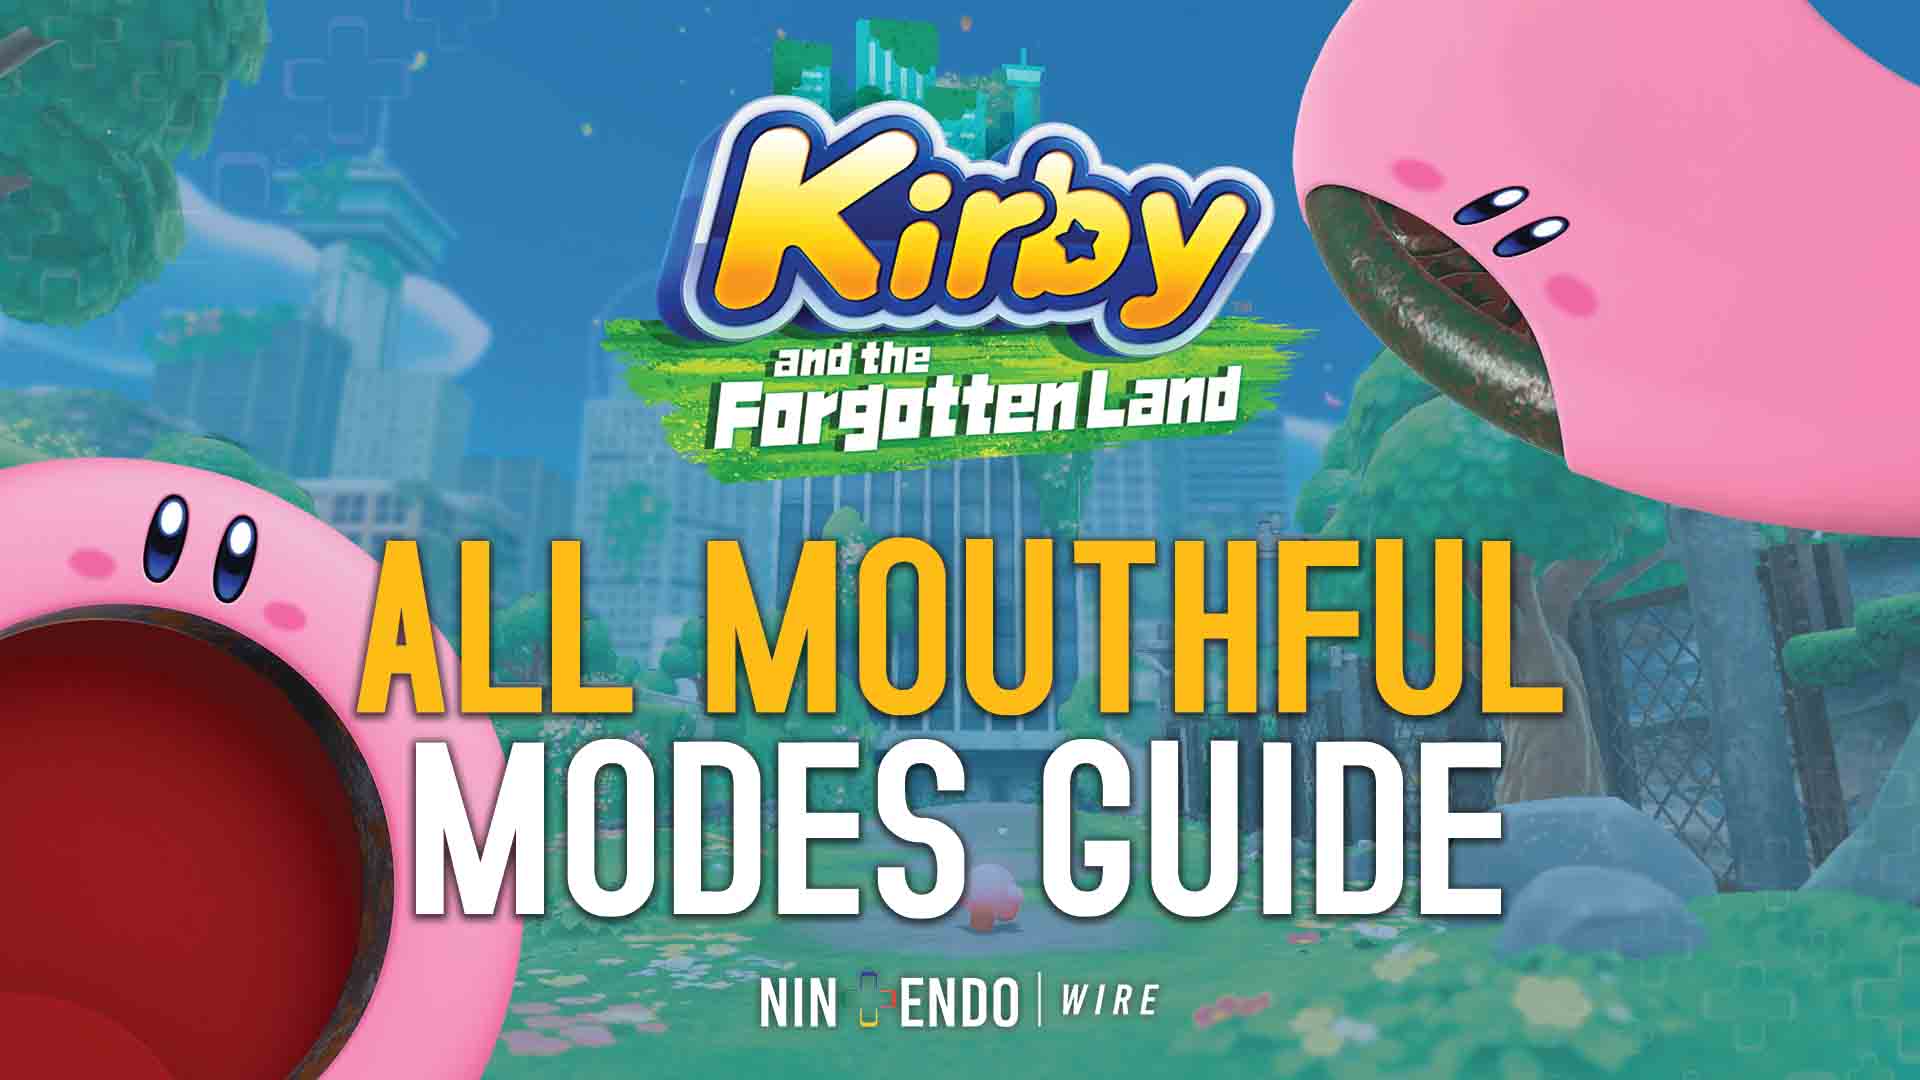 Guide – Completing the My Nintendo Kirby and the Forgotten Land